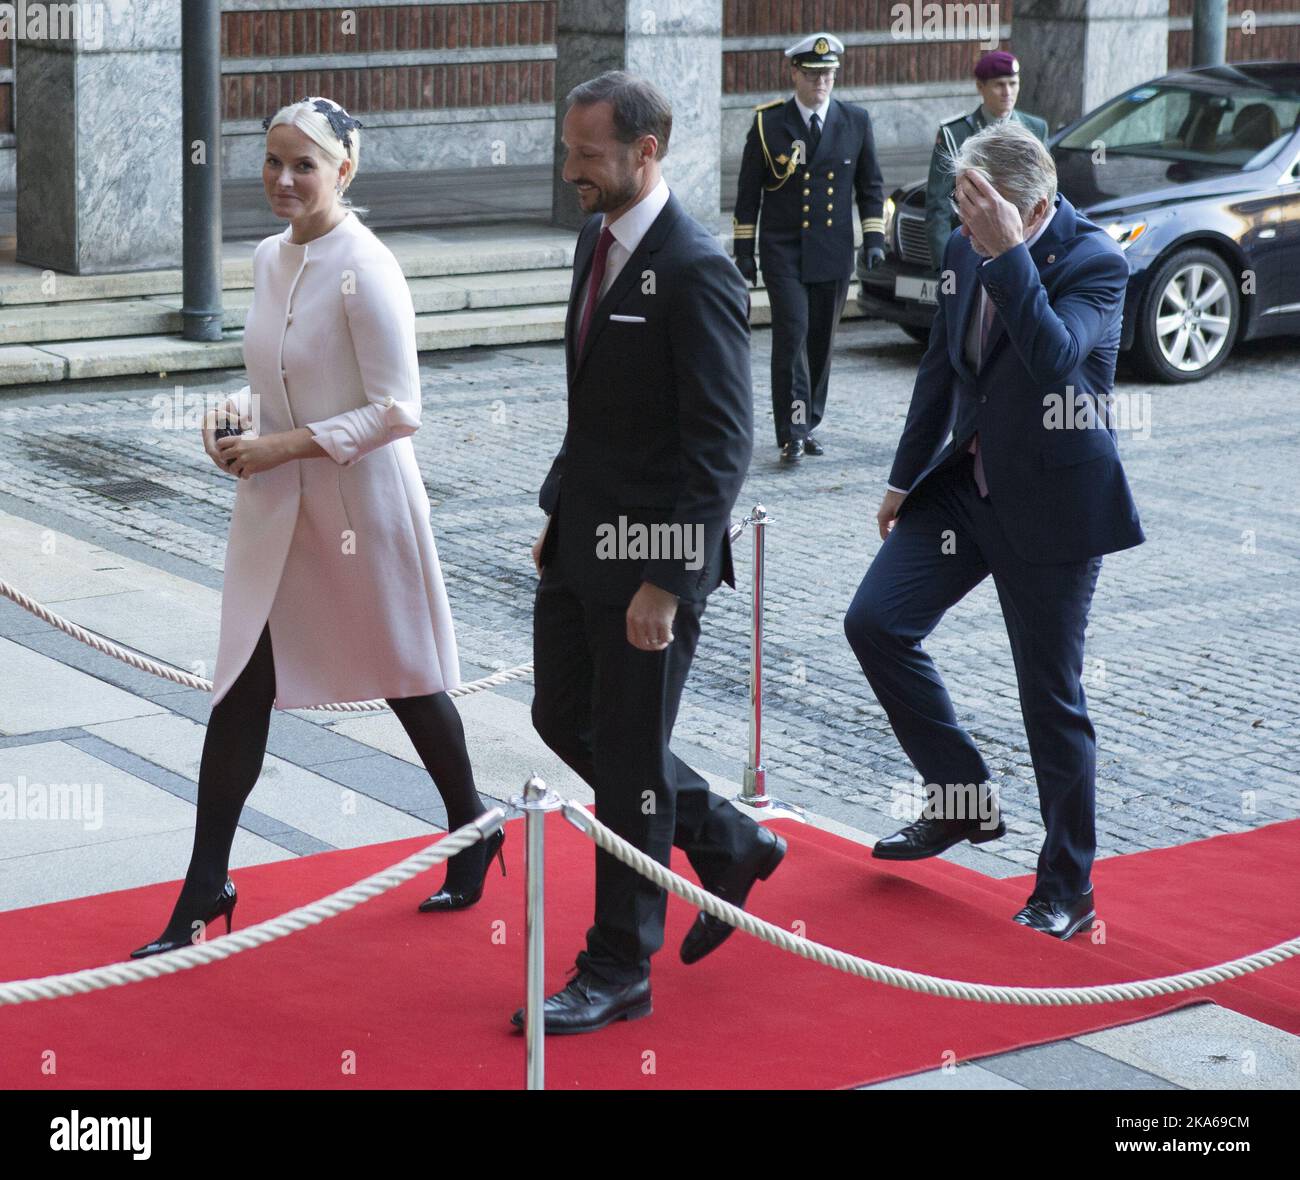 Oslo 20141210. Nobel Peace Prize 2014. The Royal Family arrive Town Hall to attend the ceremony Wednesday. From left: Crown Princess Mette-Marit, Crown Prince Haakon and Mayor Fabian Stang. Photo: Torstein Boe/ Stock Photo